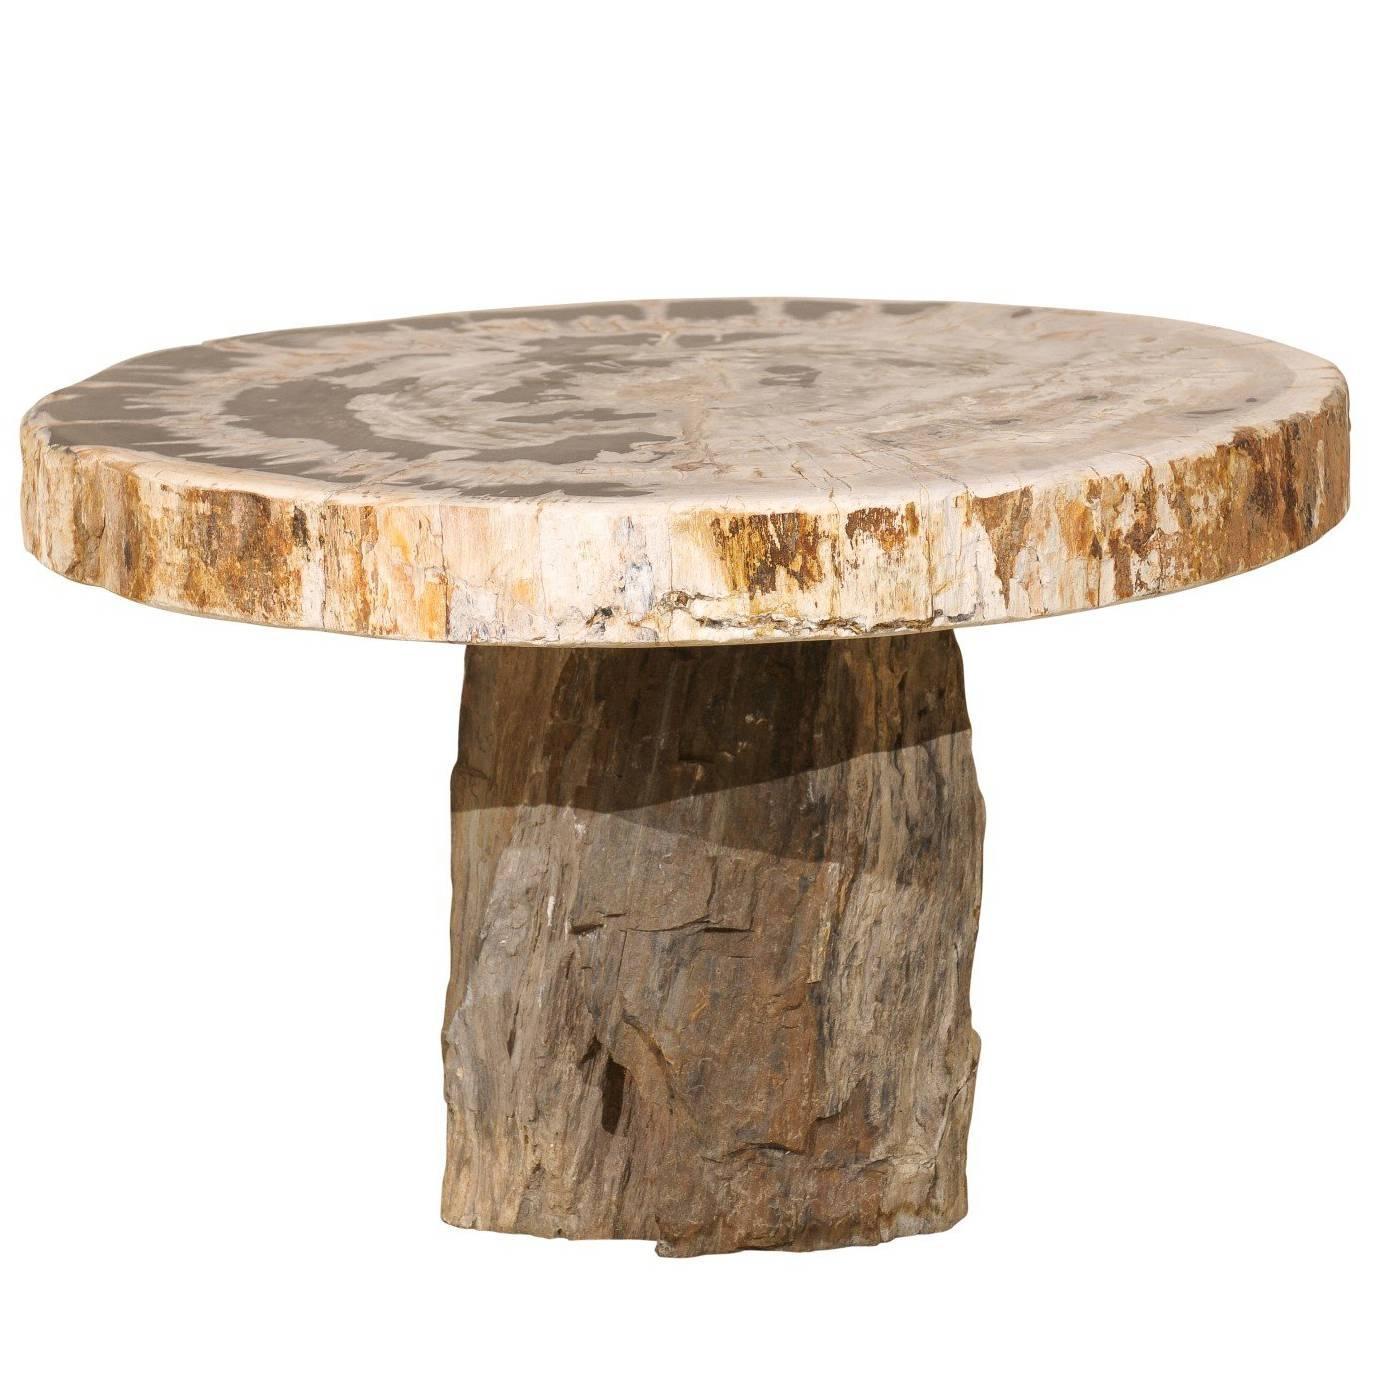 A Live-Edge Petrified Wood Pedestal Coffee Table w/Mostly Round-Shaped Top